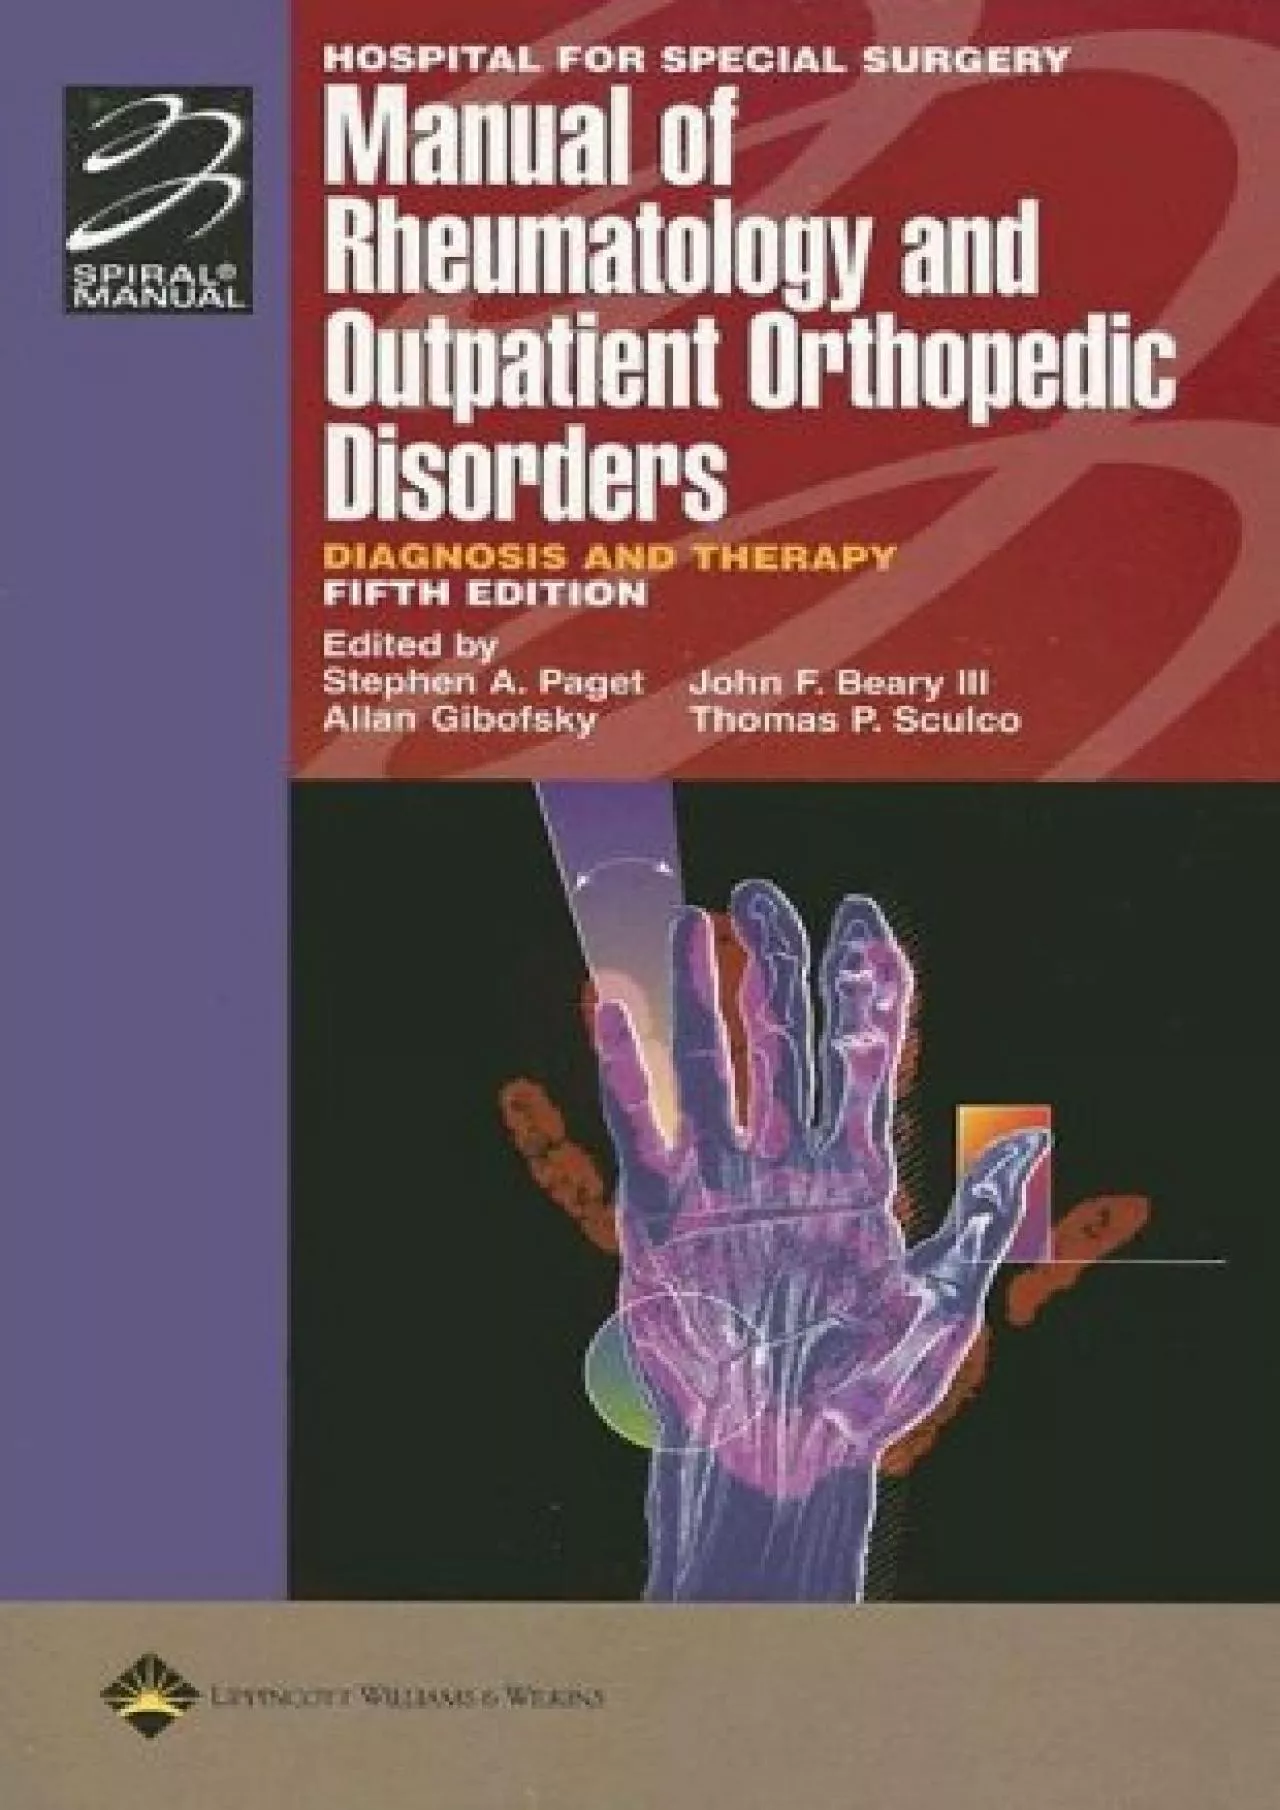 (DOWNLOAD)-Hospital for Special Surgery Manual of Rheumatology and Outpatient Orthopedic